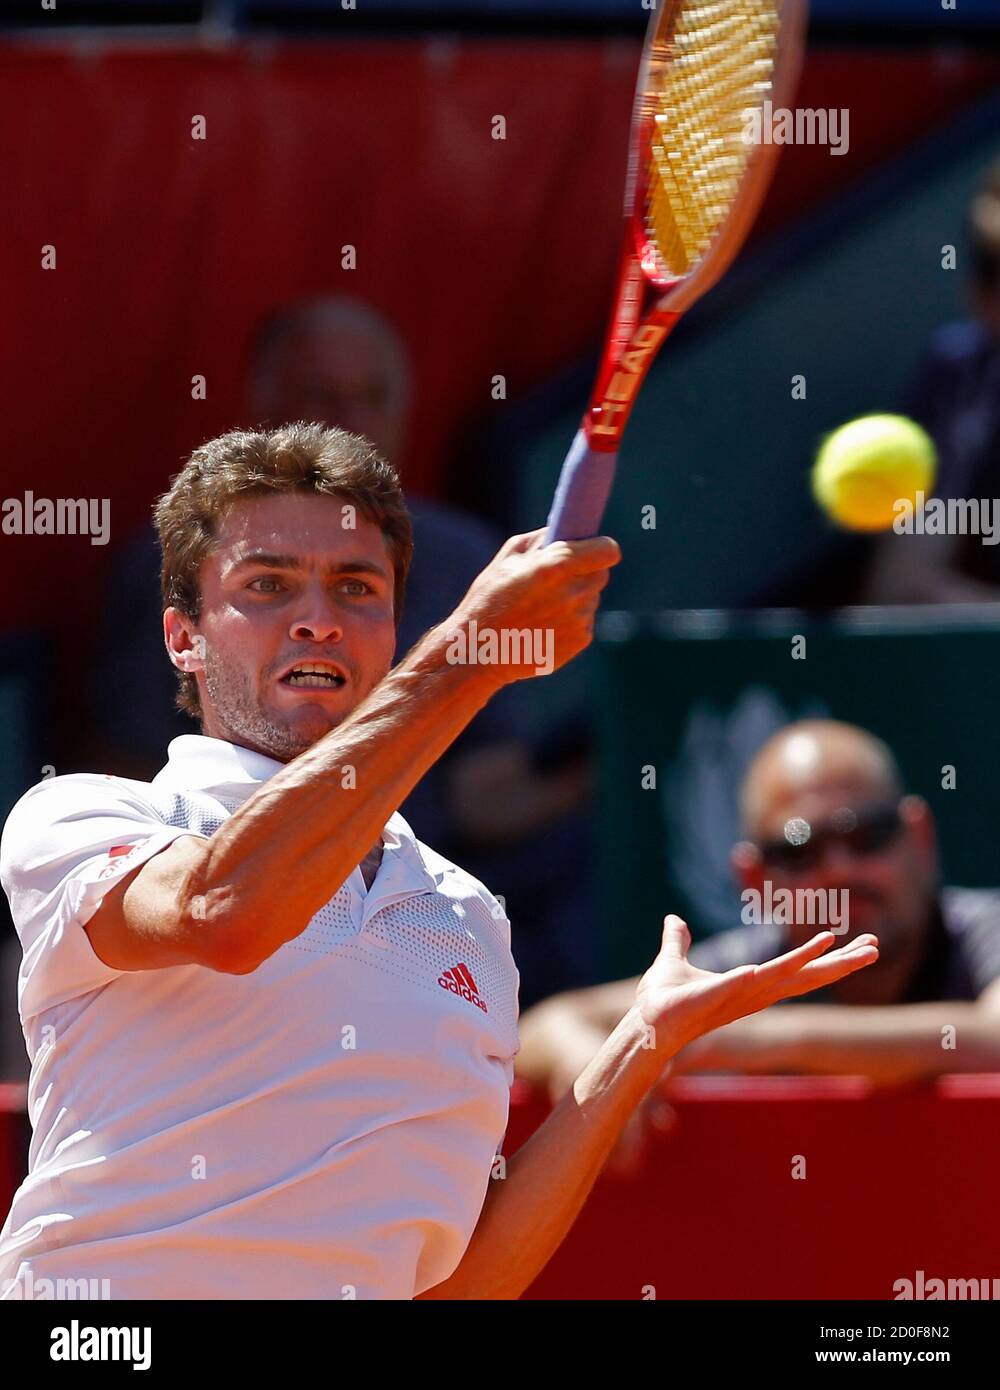 Gilles Simon of France returns the ball to Matthias Bachinger of Germany  during their semifinal match at the BRD Nastase Tiriac Trophy 2012 tennis  tournament in Bucharest April 28, 2012. REUTERS/Bogdan Cristel (